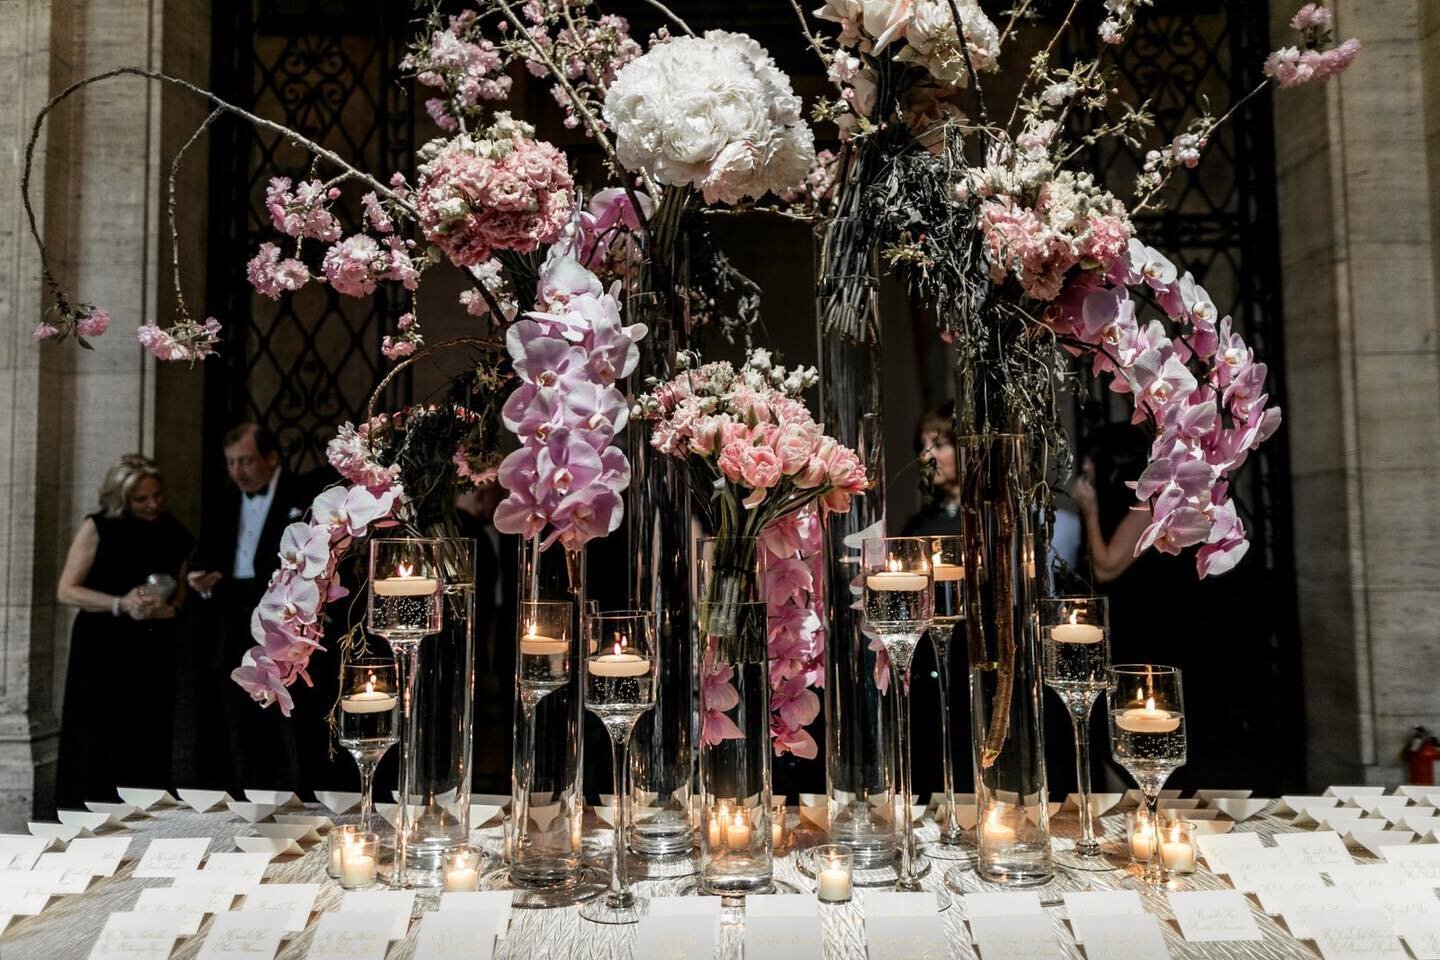 Find your name 🥂

Event Planning &amp; Design: @stateoftheartny
Photographer: @fredmarcusstudio
D&eacute;cor: @designsbyahnnyc
Band: @thehudsonprojectband 
Venue: @ciprianievents &ndash; Cipriani 25 Broadway